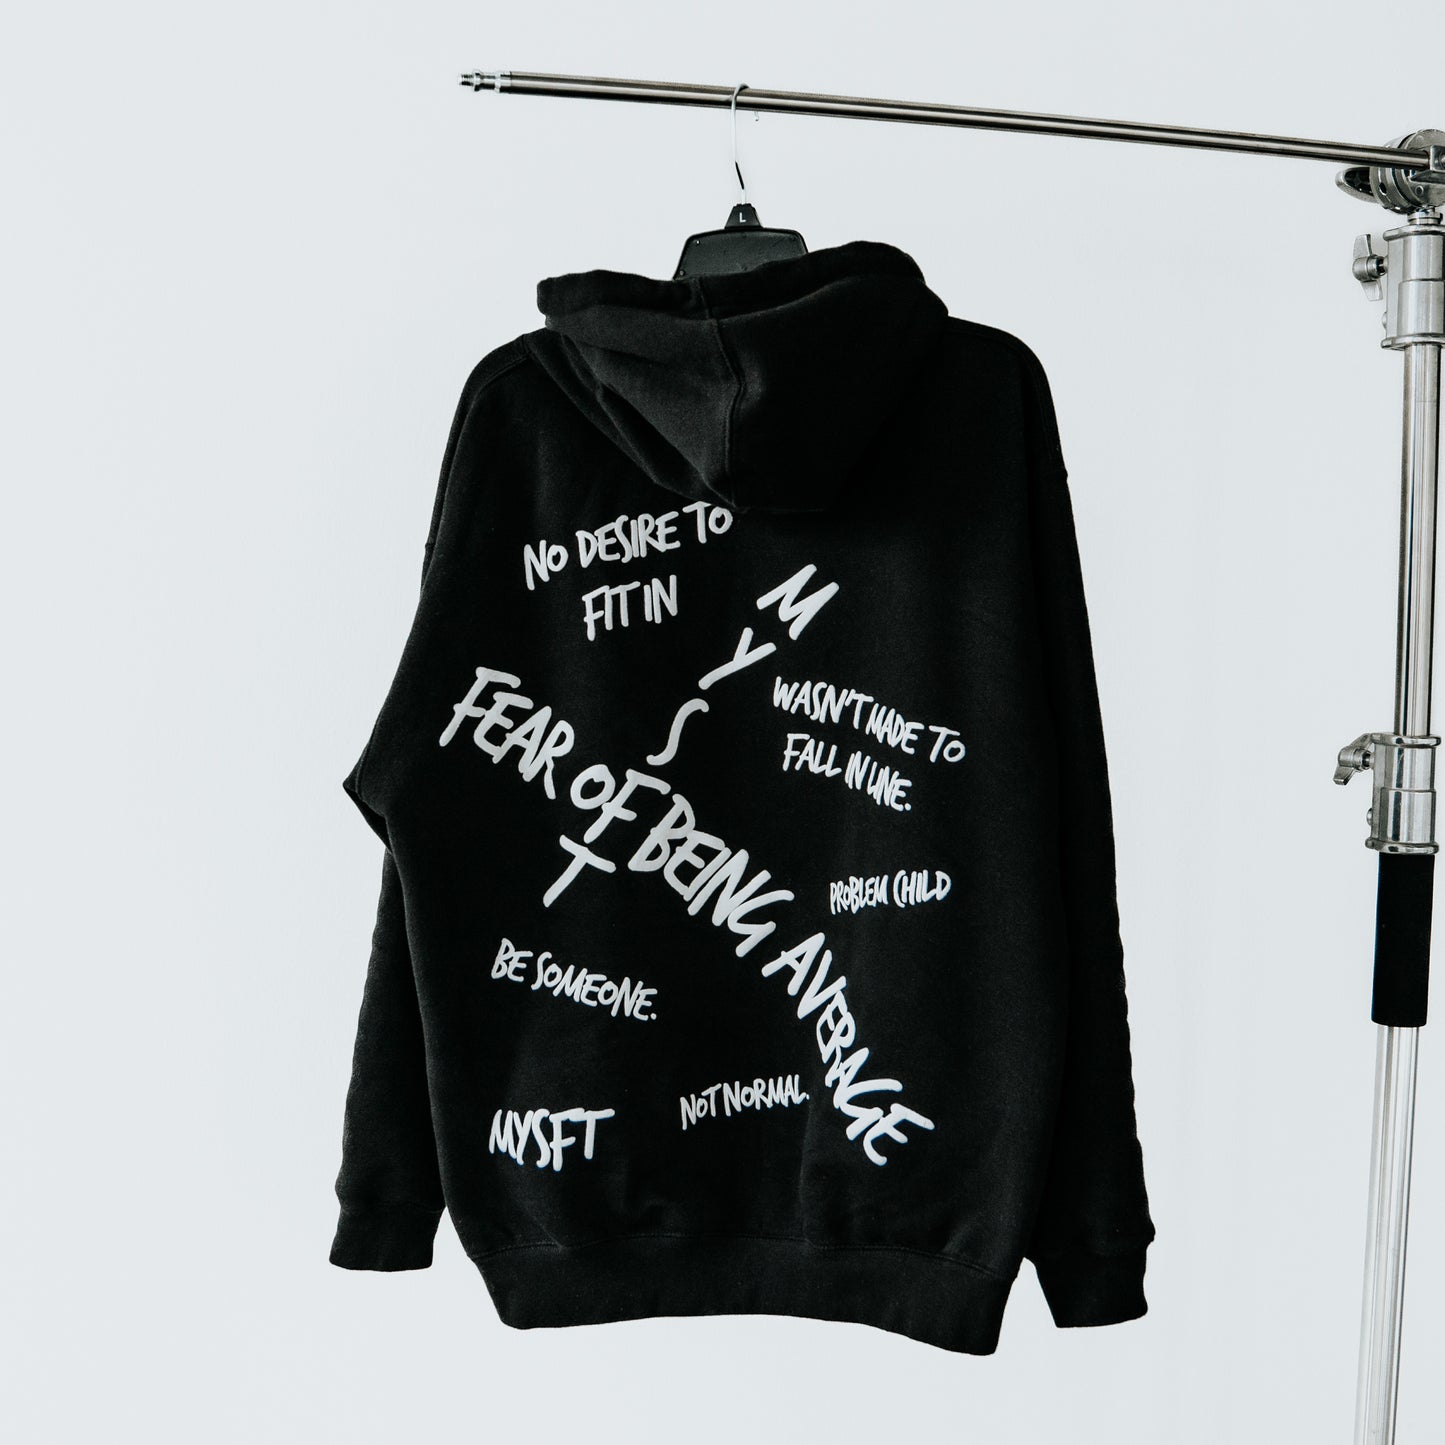 MYSFT® "FEAR OF BEING AVERAGE" HOODIE